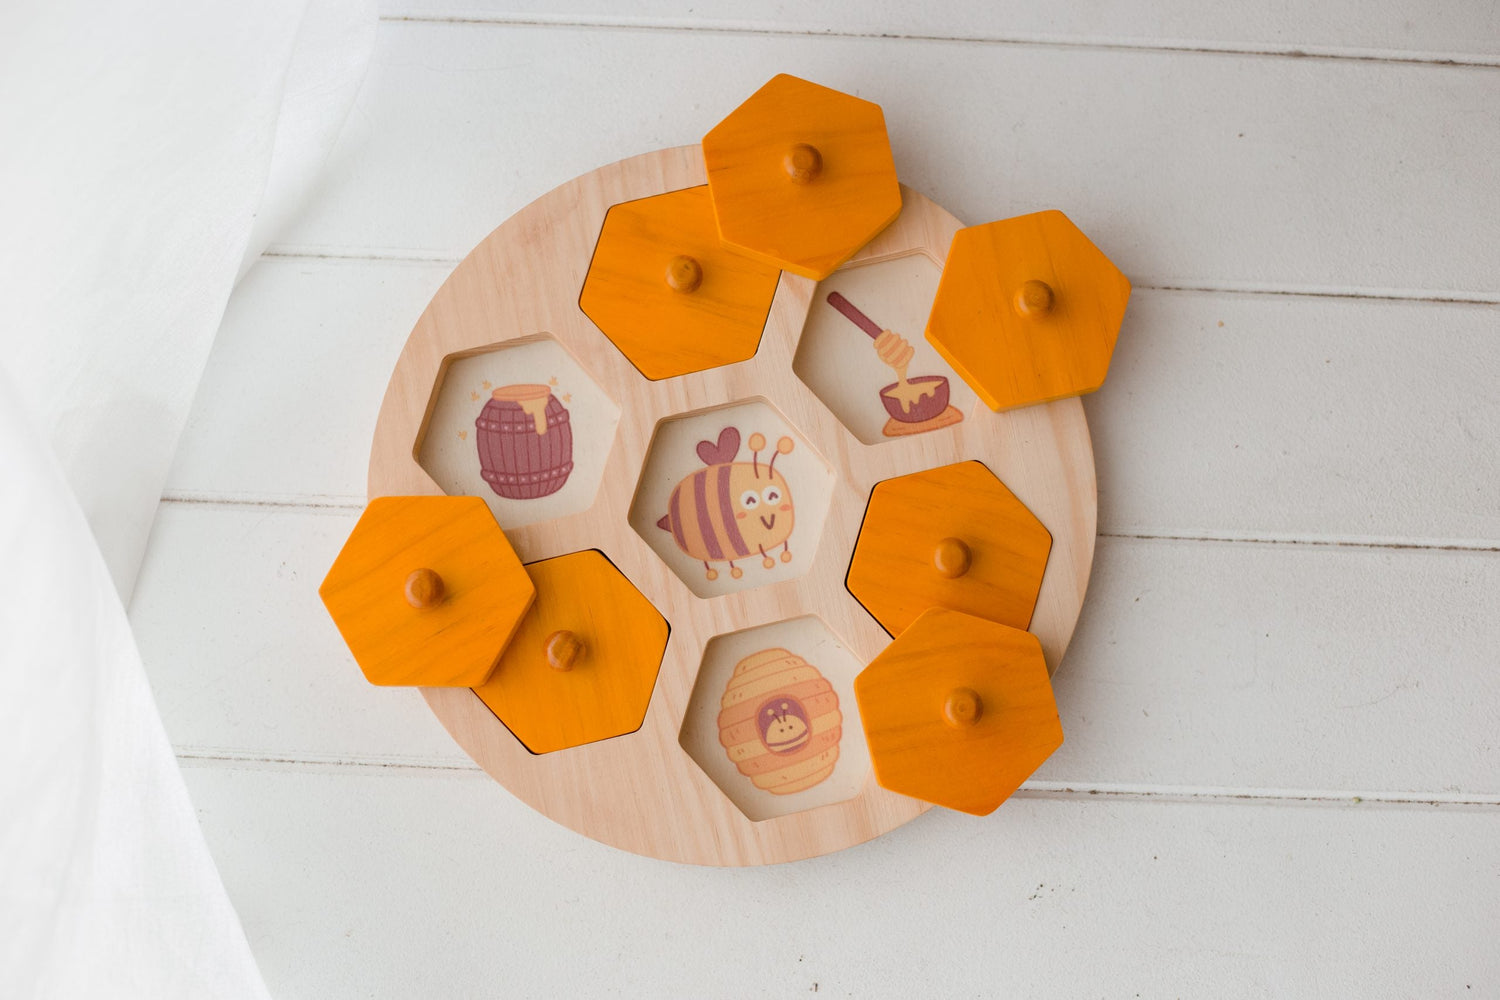 BEE LIFE CYCLE HIVE PUZZLE by QTOYS - The Playful Collective